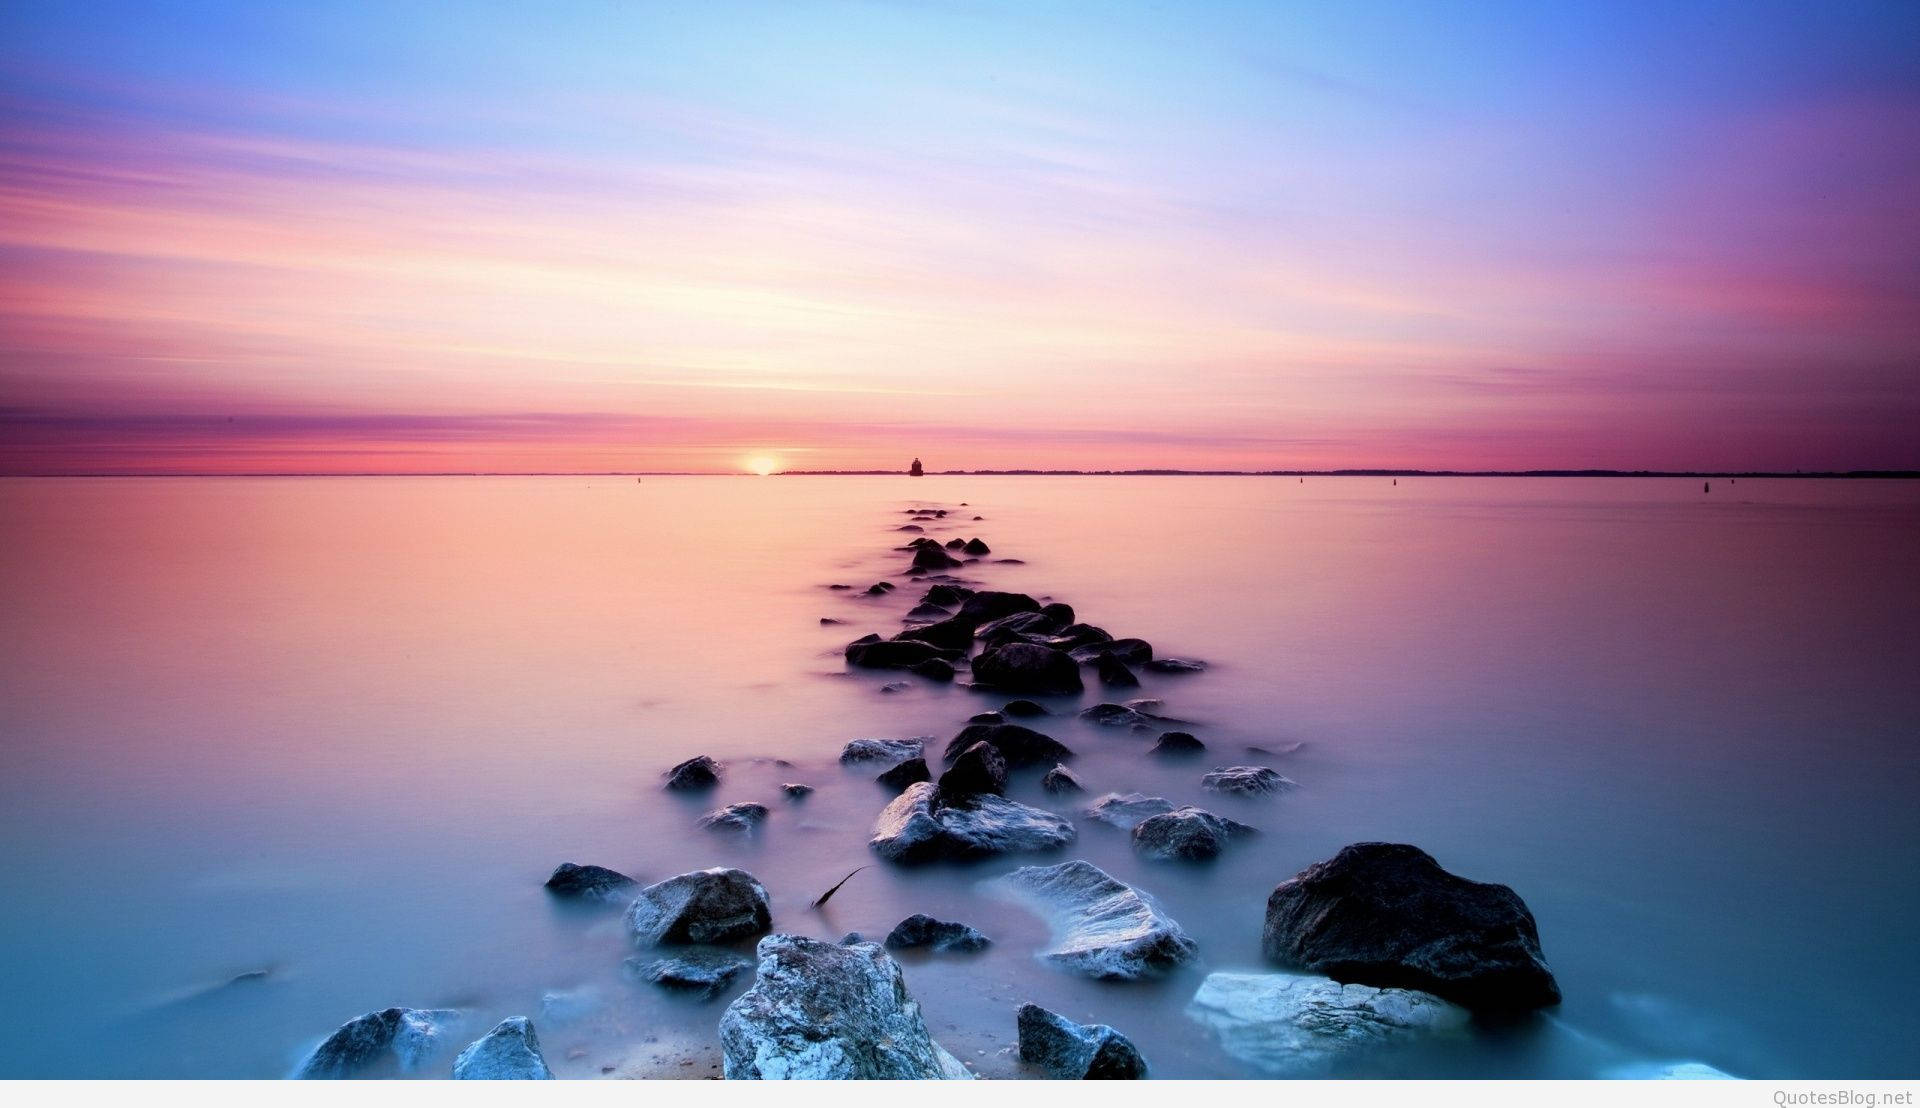 A Long Exposure Of Rocks And Water At Sunset Wallpaper